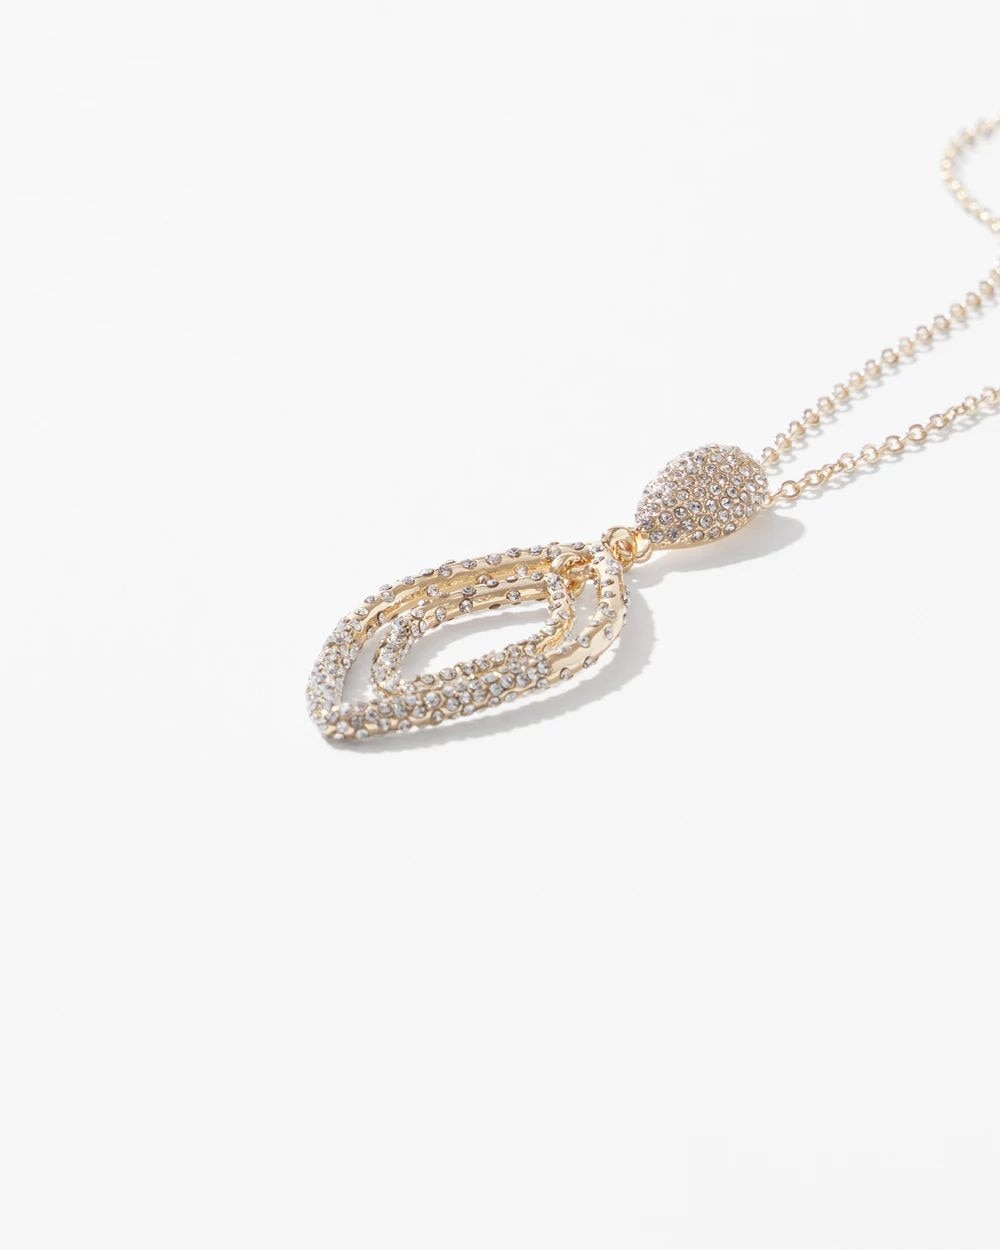 Gold-Dusted Pave Pedant Necklace click to view larger image.